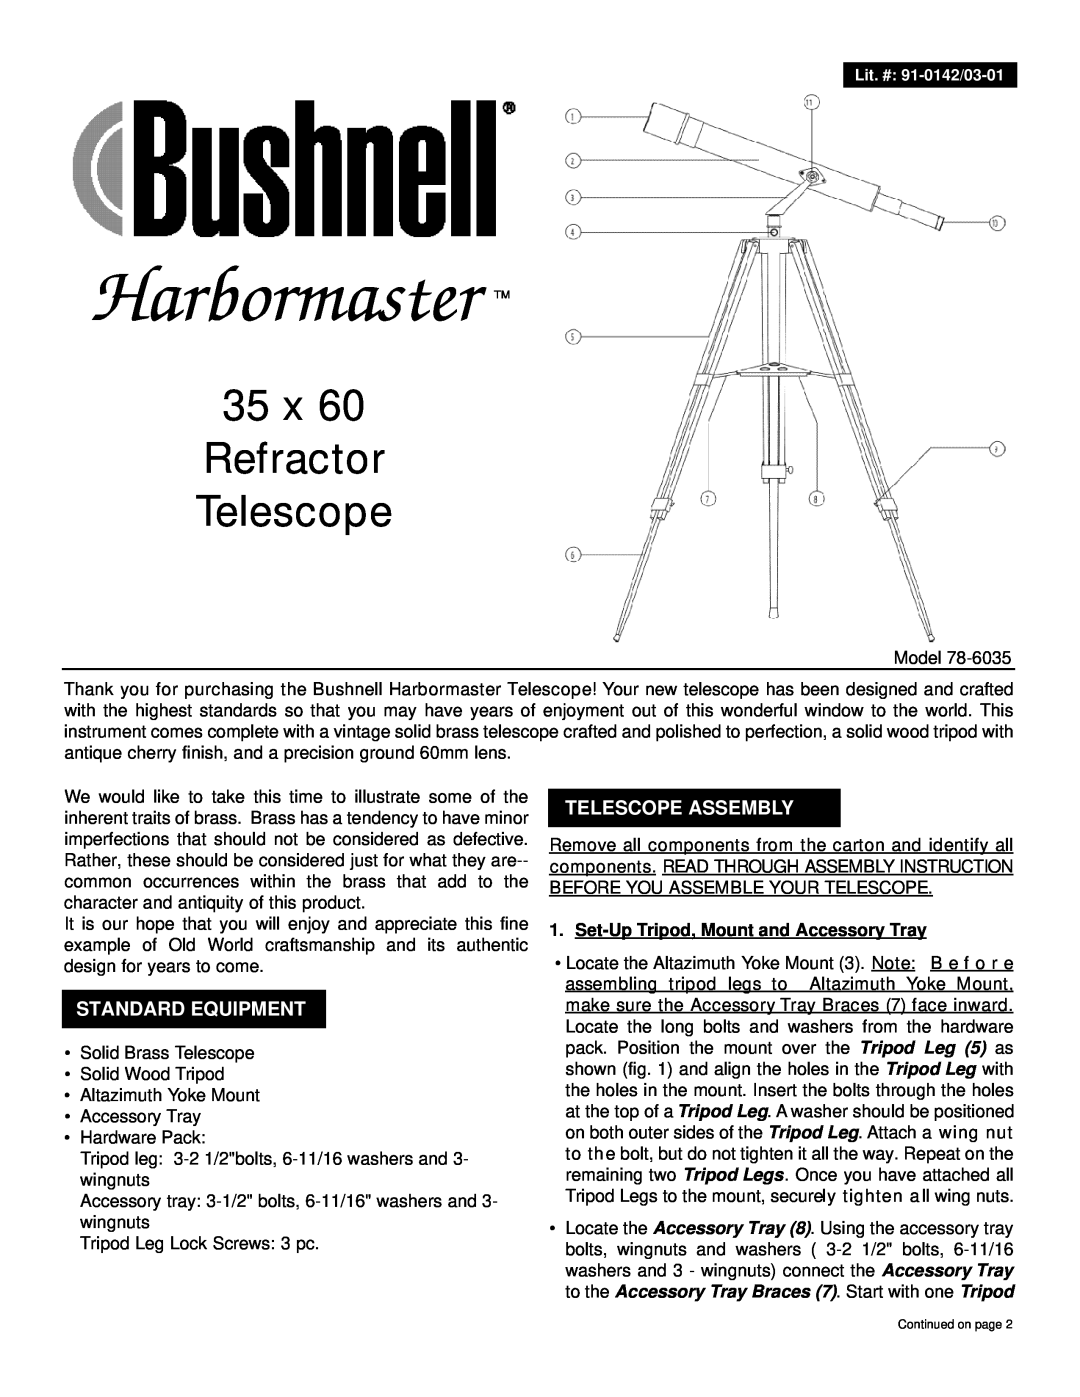 Bushnell 78-6035 manual Standard Equipment, Telescope Assembly, Set-Up Tripod, Mount and Accessory Tray, Harbormaster 